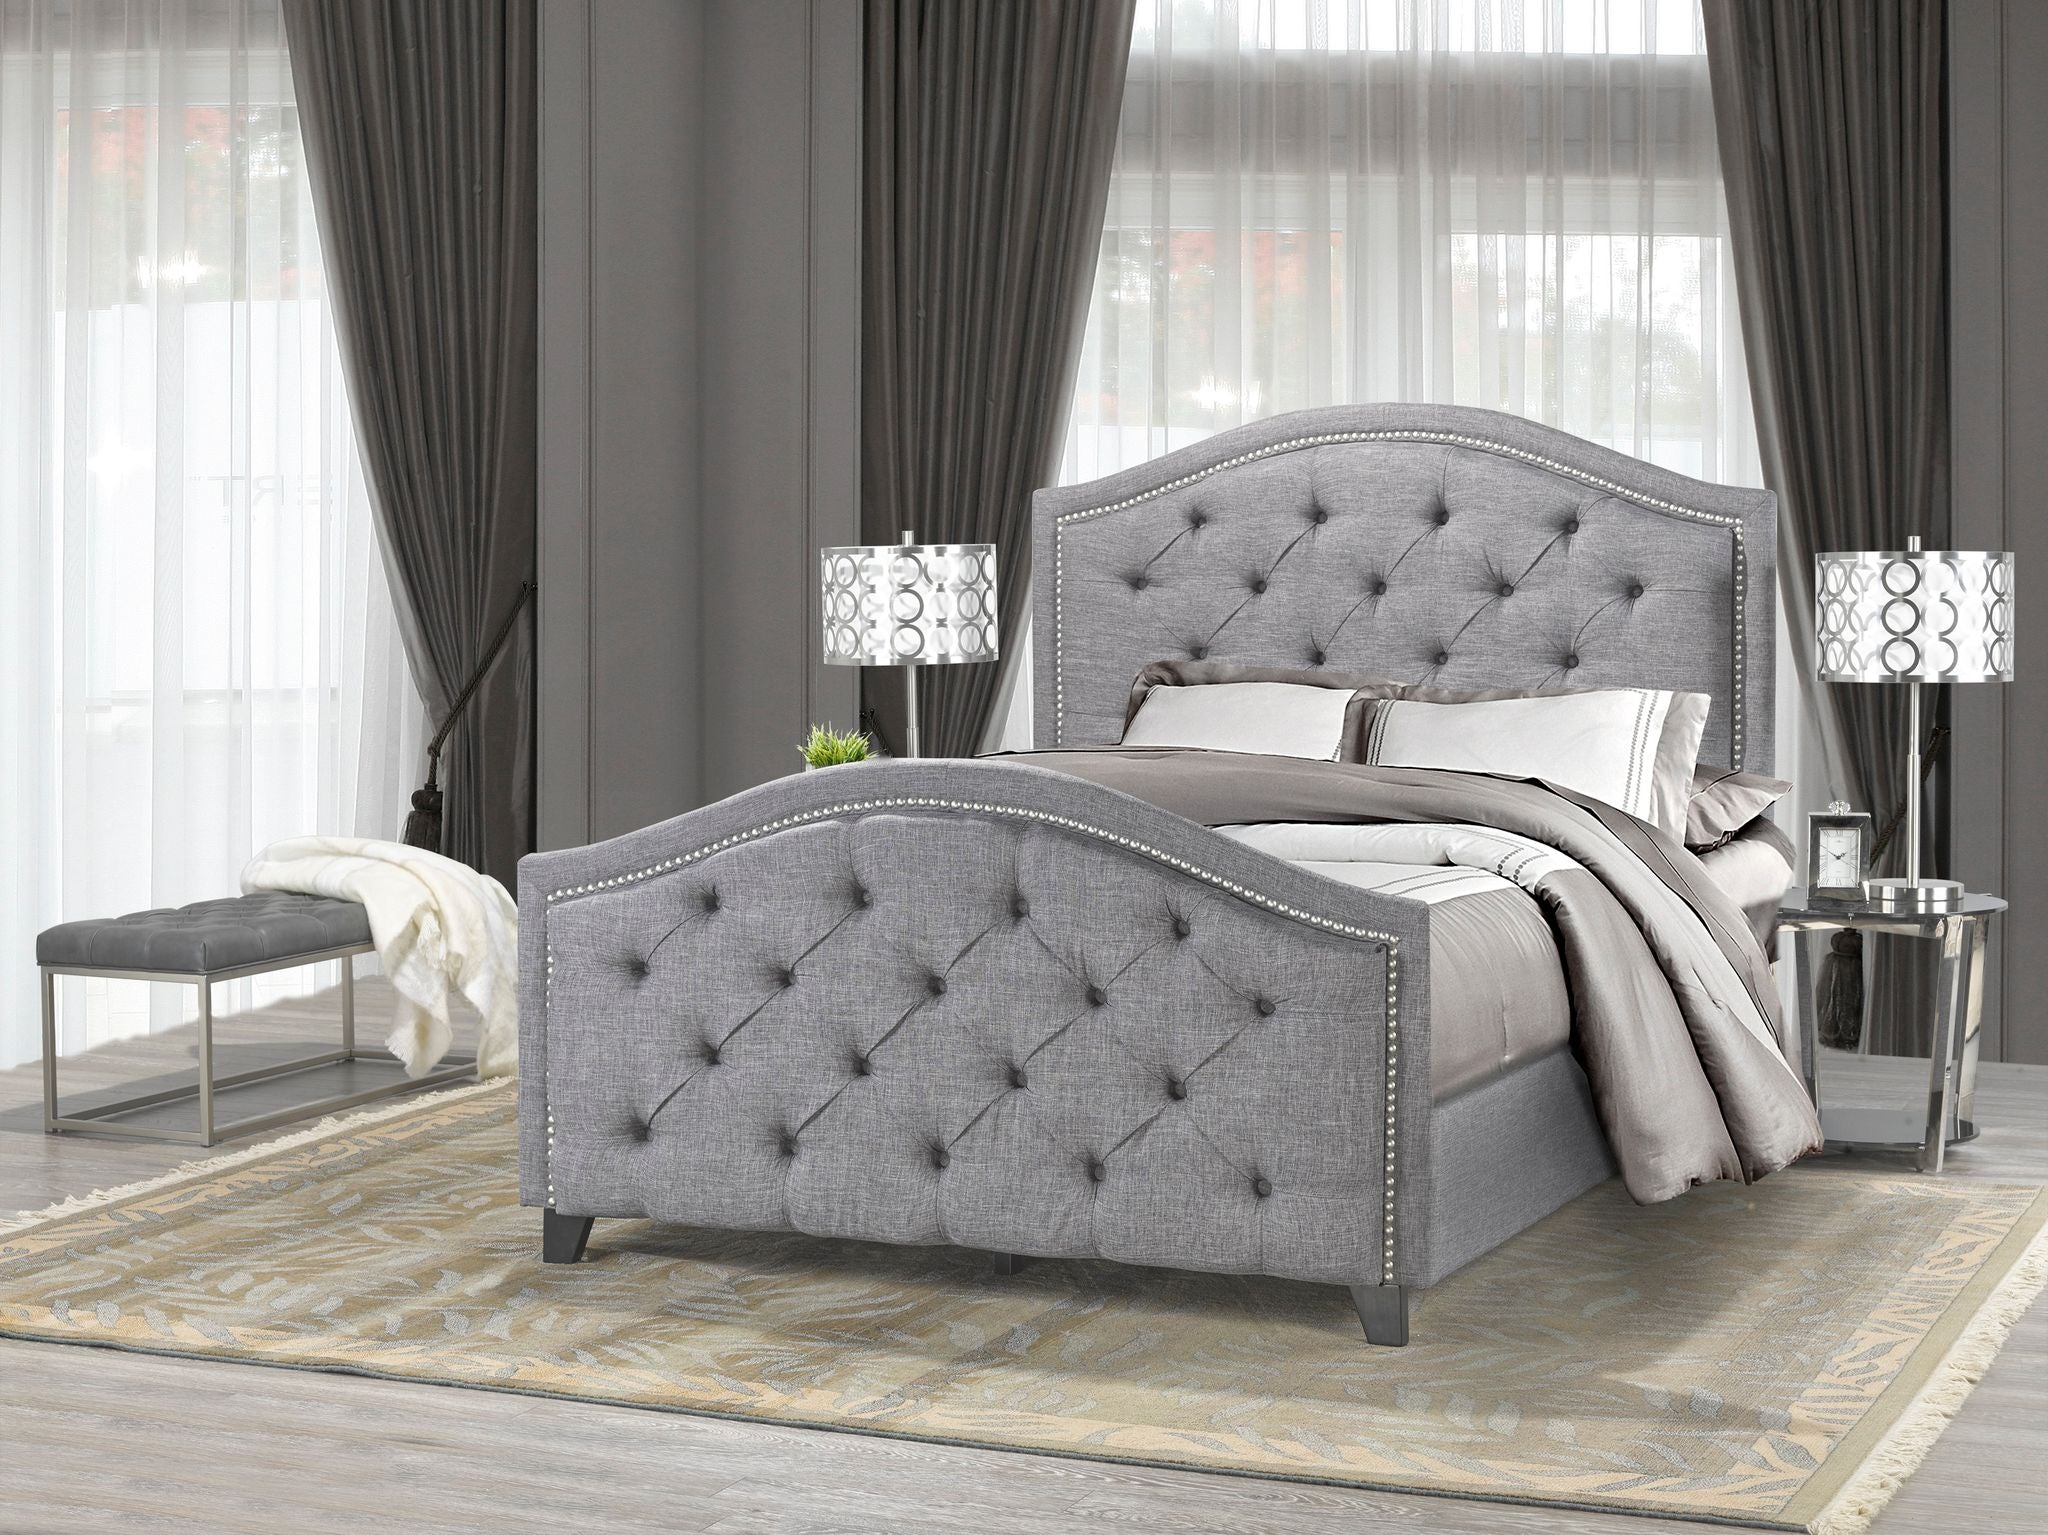 Sale, Clearance and Outlet | Up to 70% off | Selacy Furniture Toronto